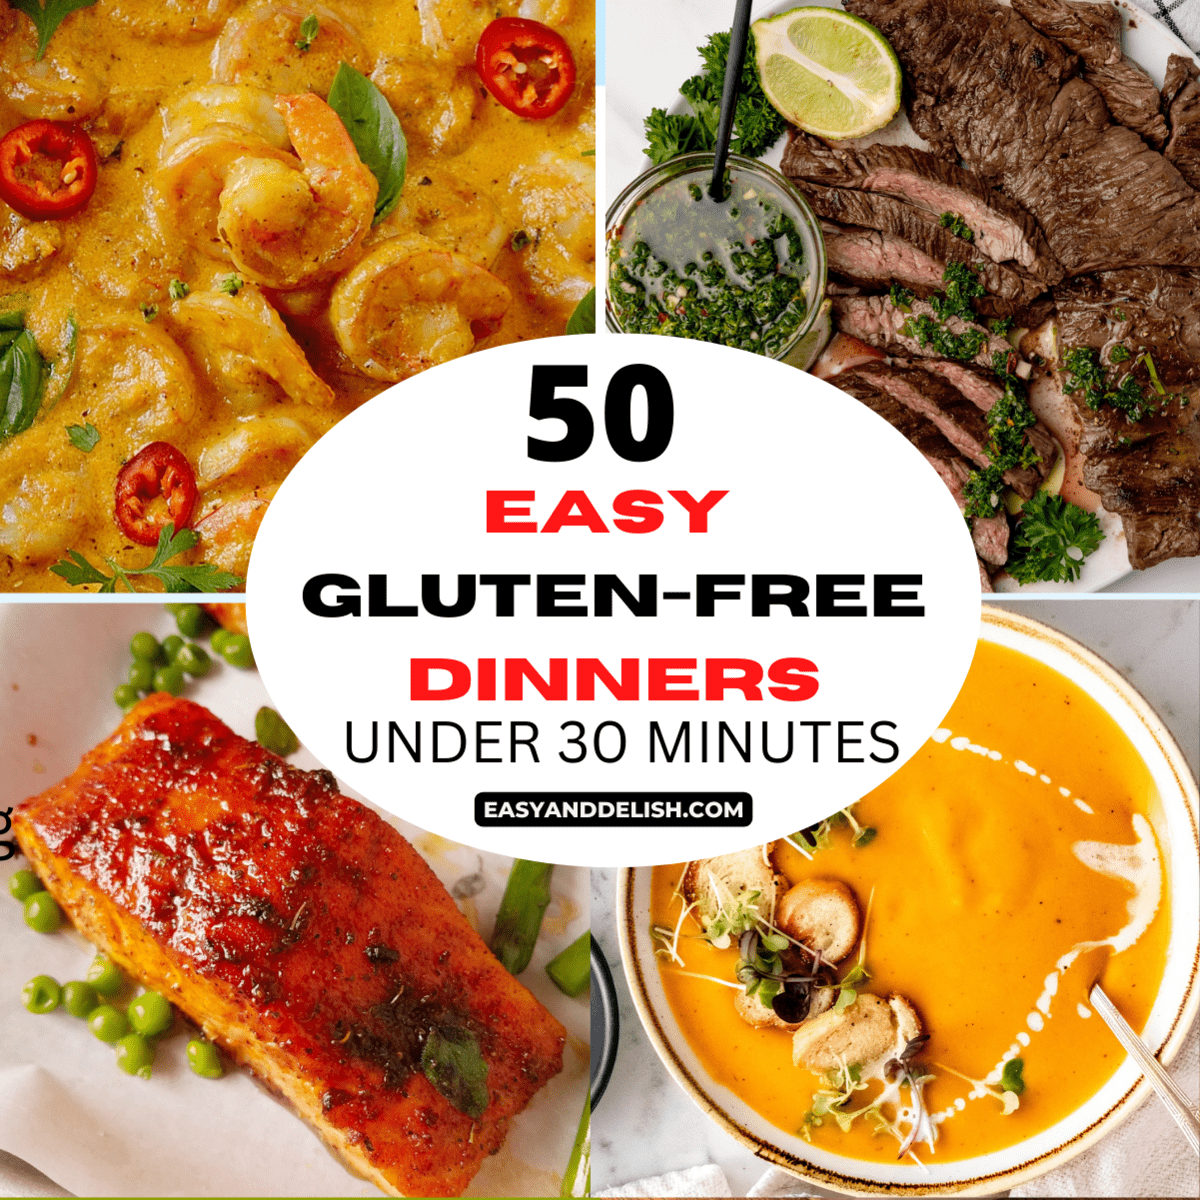 image collage shoing 4 out of 50 easy gluten-free dinners under 30 minutes